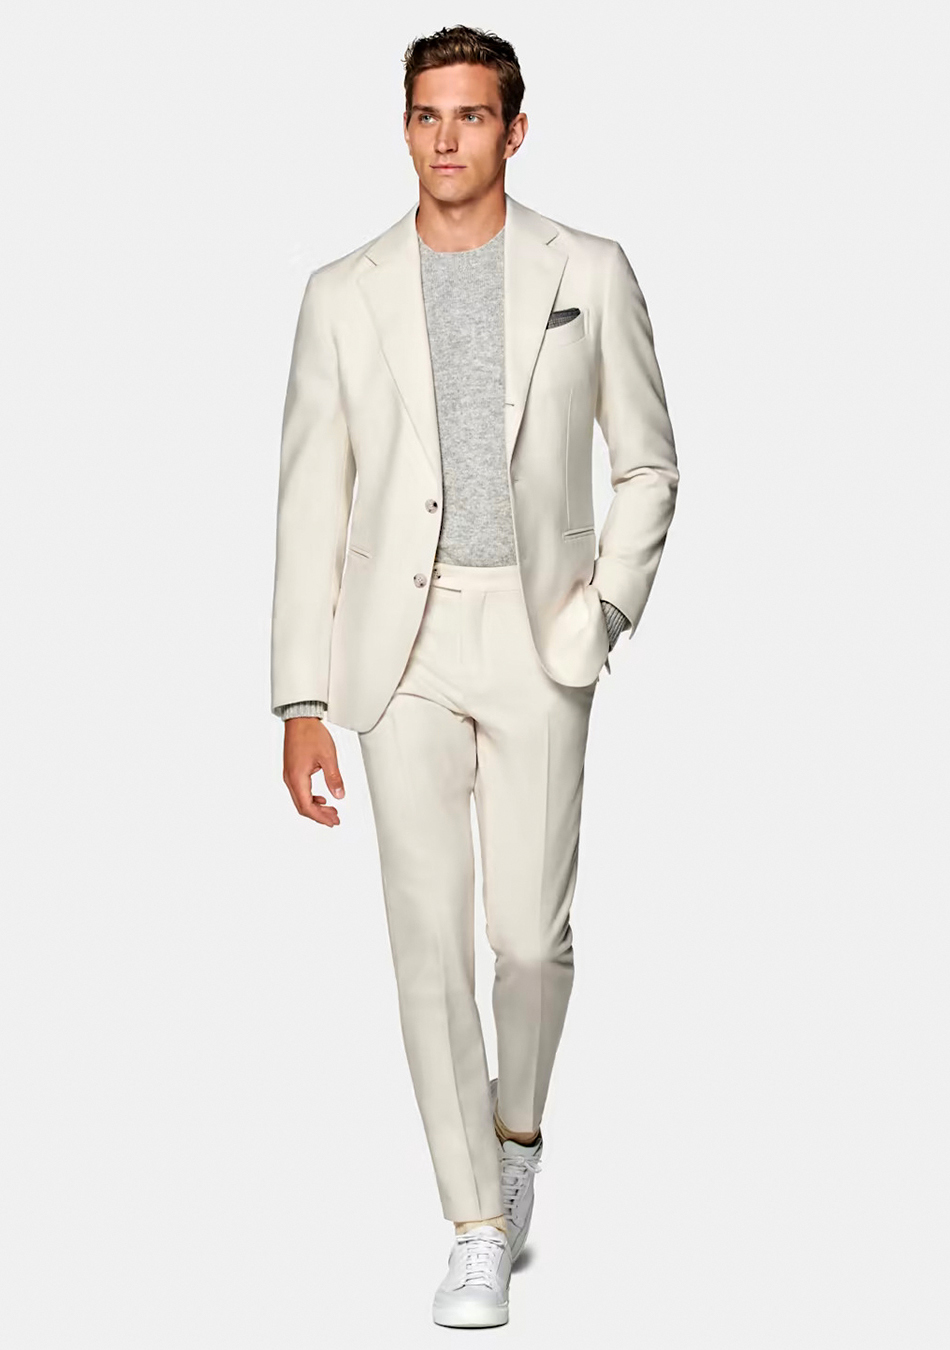 Beige suit, grey crew-neck t-shirt, and white sneakers